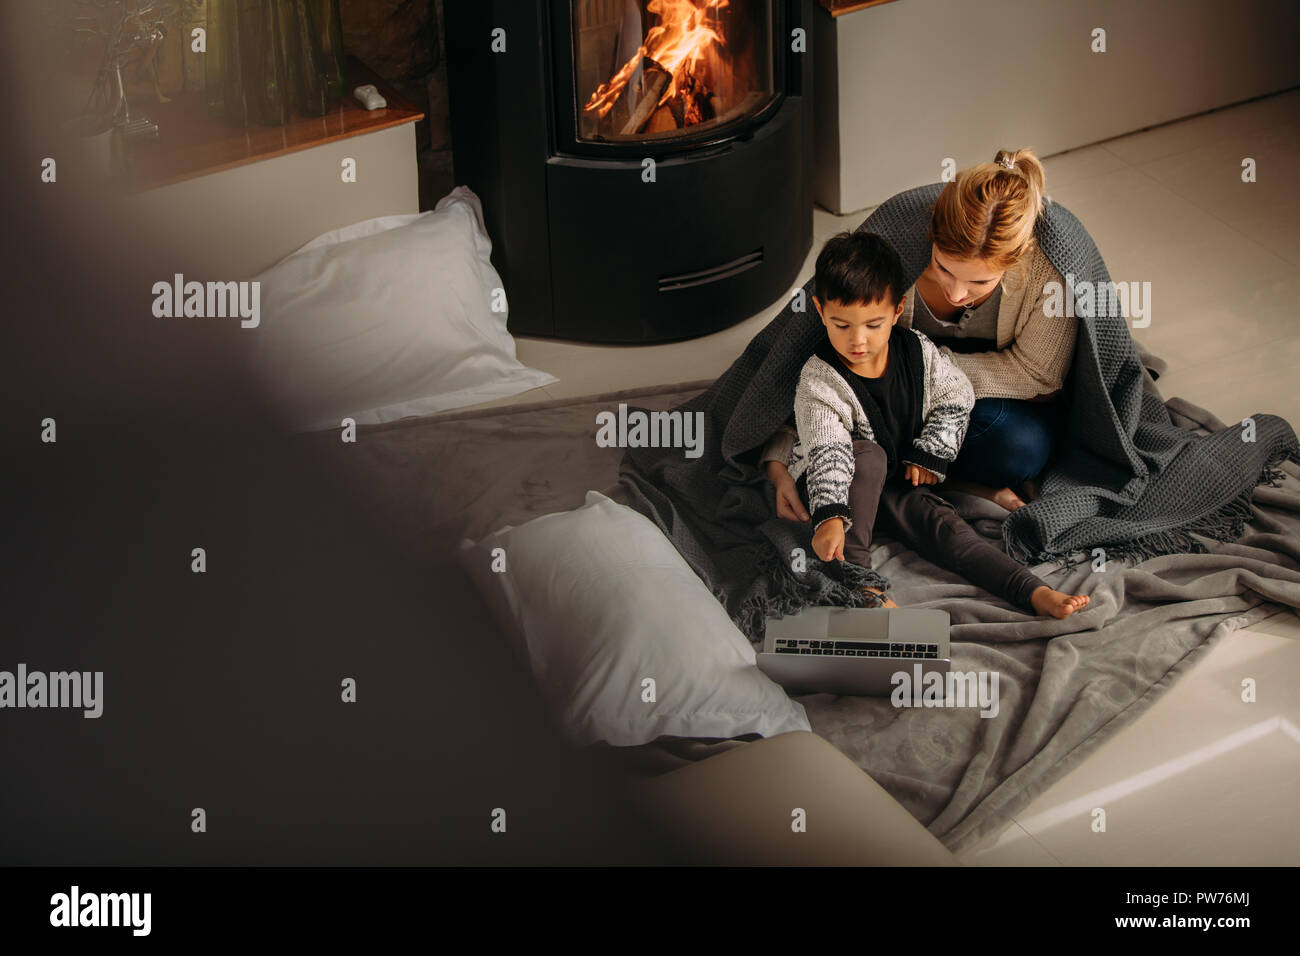 Young family sitting near fireplace looking at laptop. Son pointing at laptop to show something interesting to his mother at home. Stock Photo